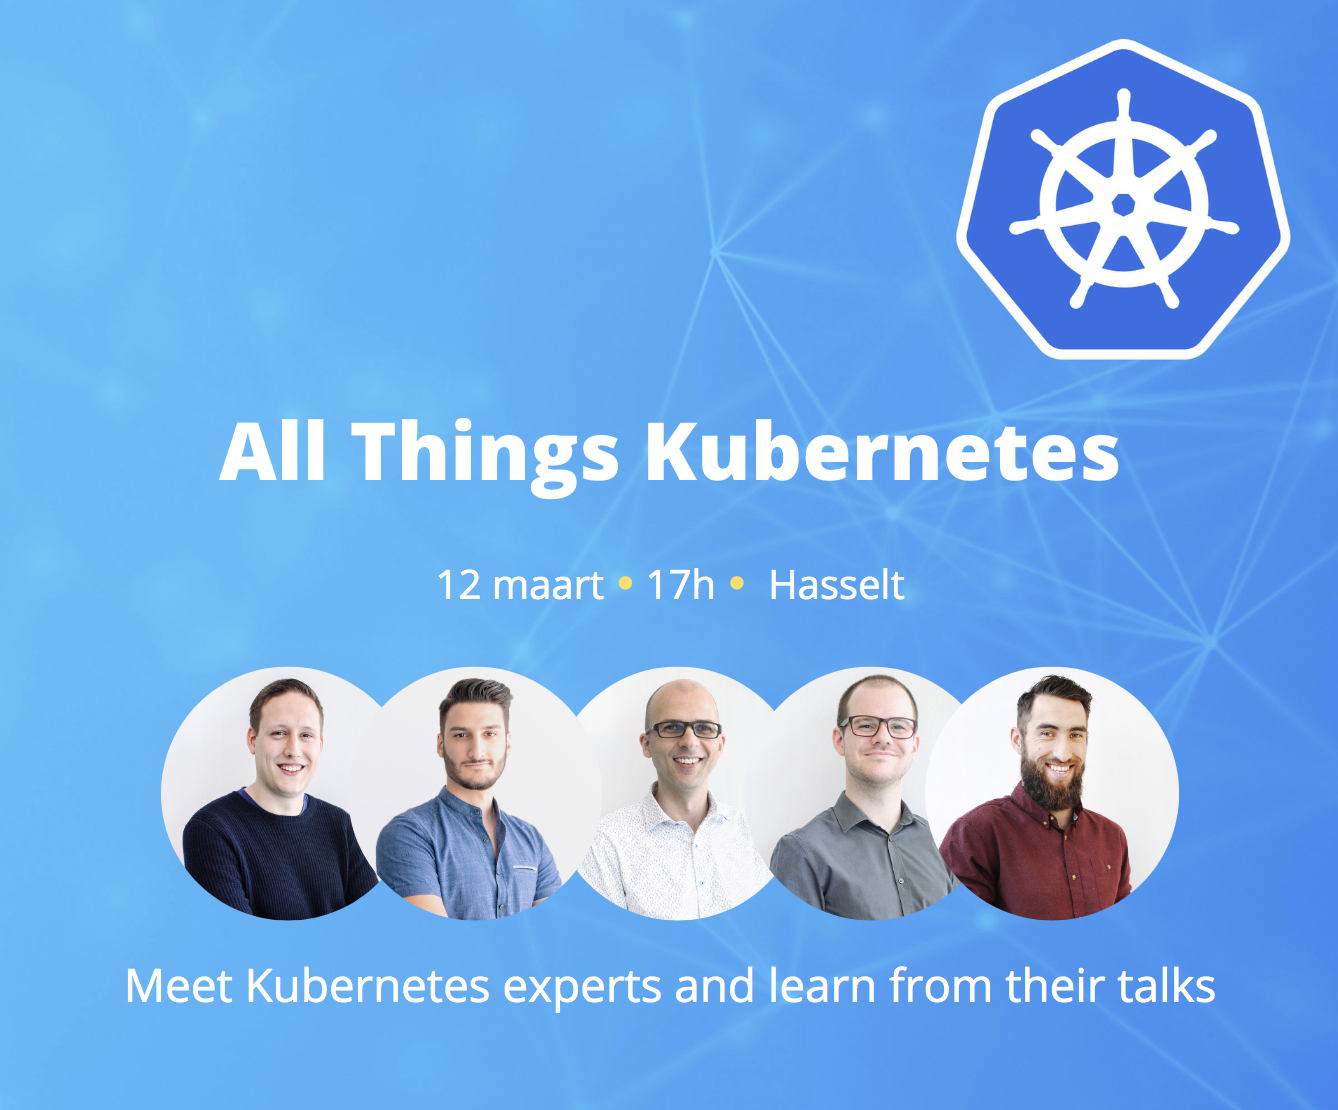 All Things Kubernetes